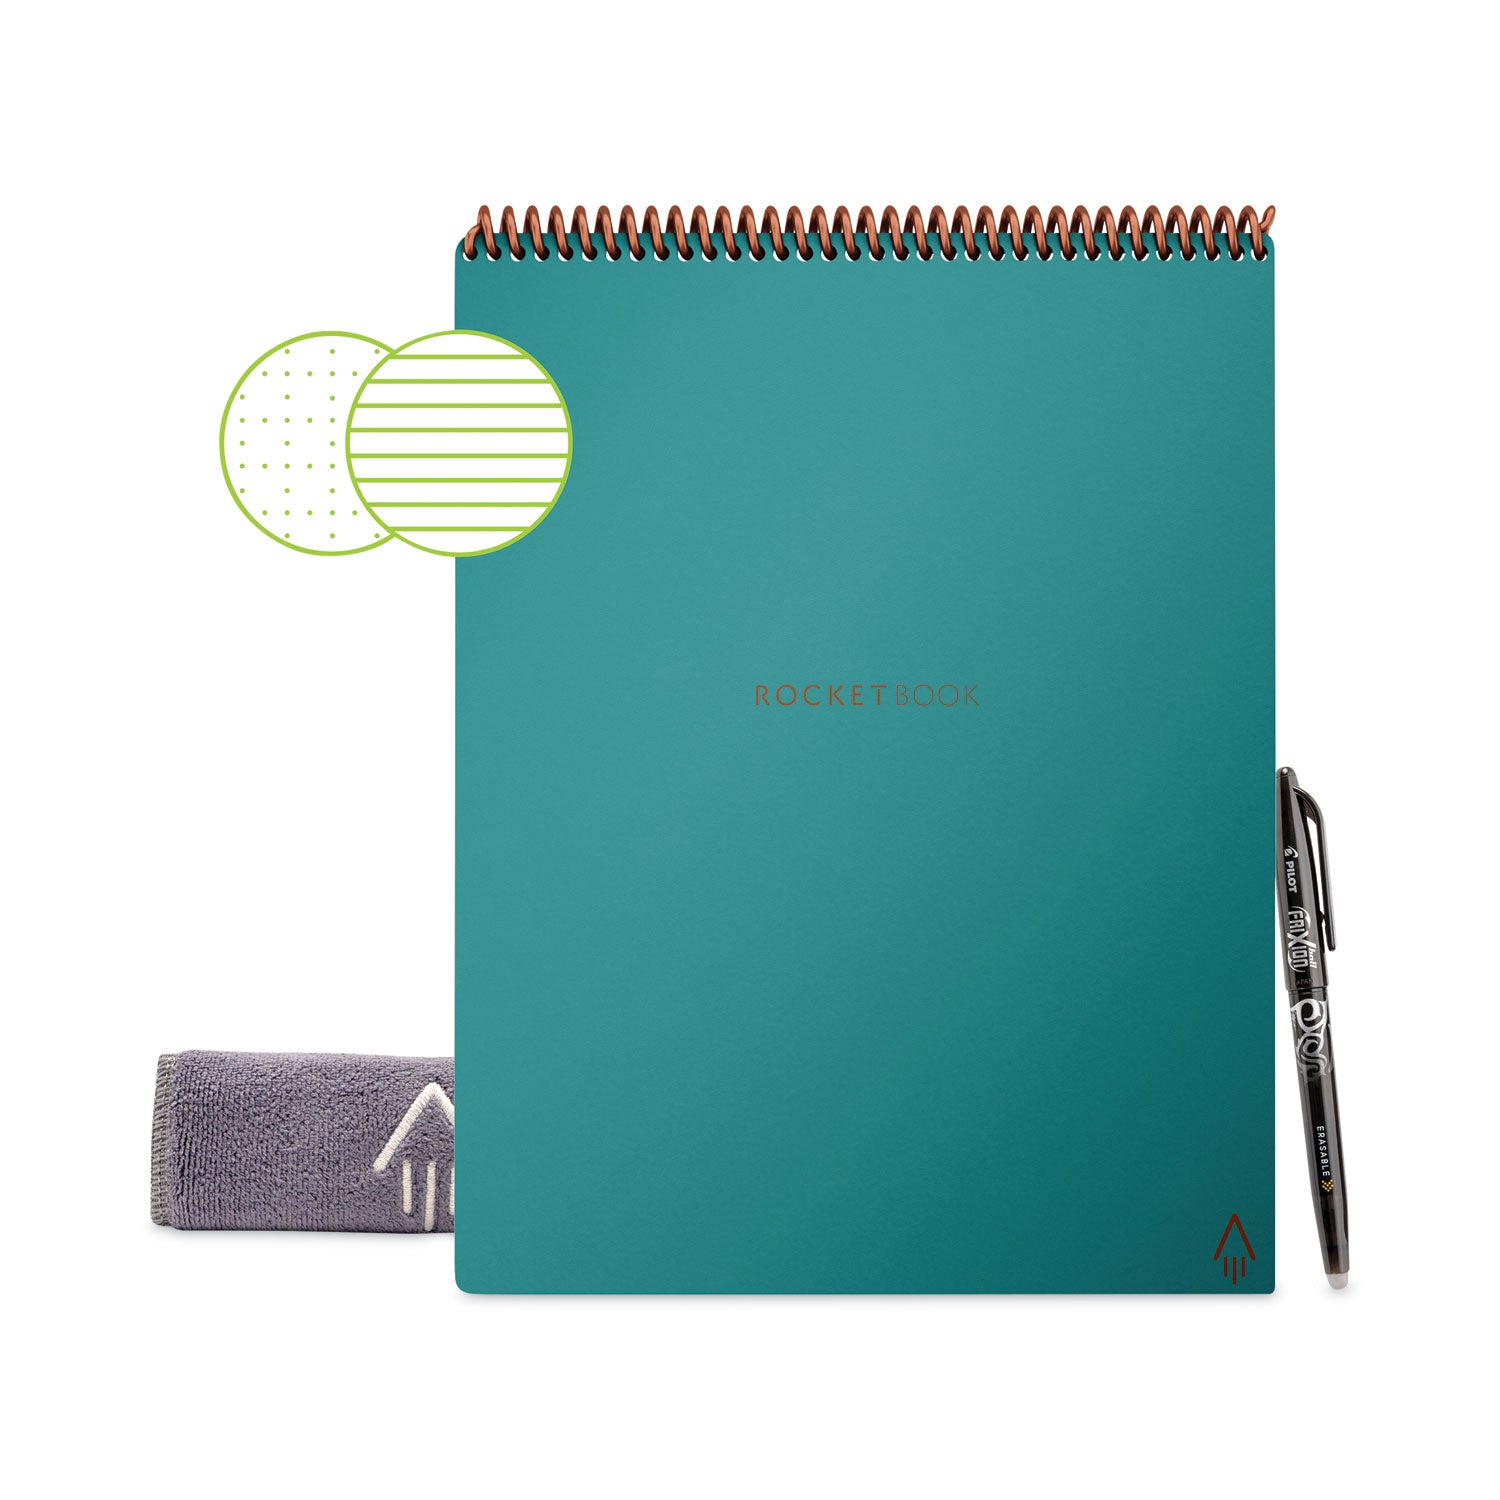 flip-smart-notepad-teal-cover-lined-dot-grid-rule-85-x-11-white-16-sheets_rkbflplrccce - 1